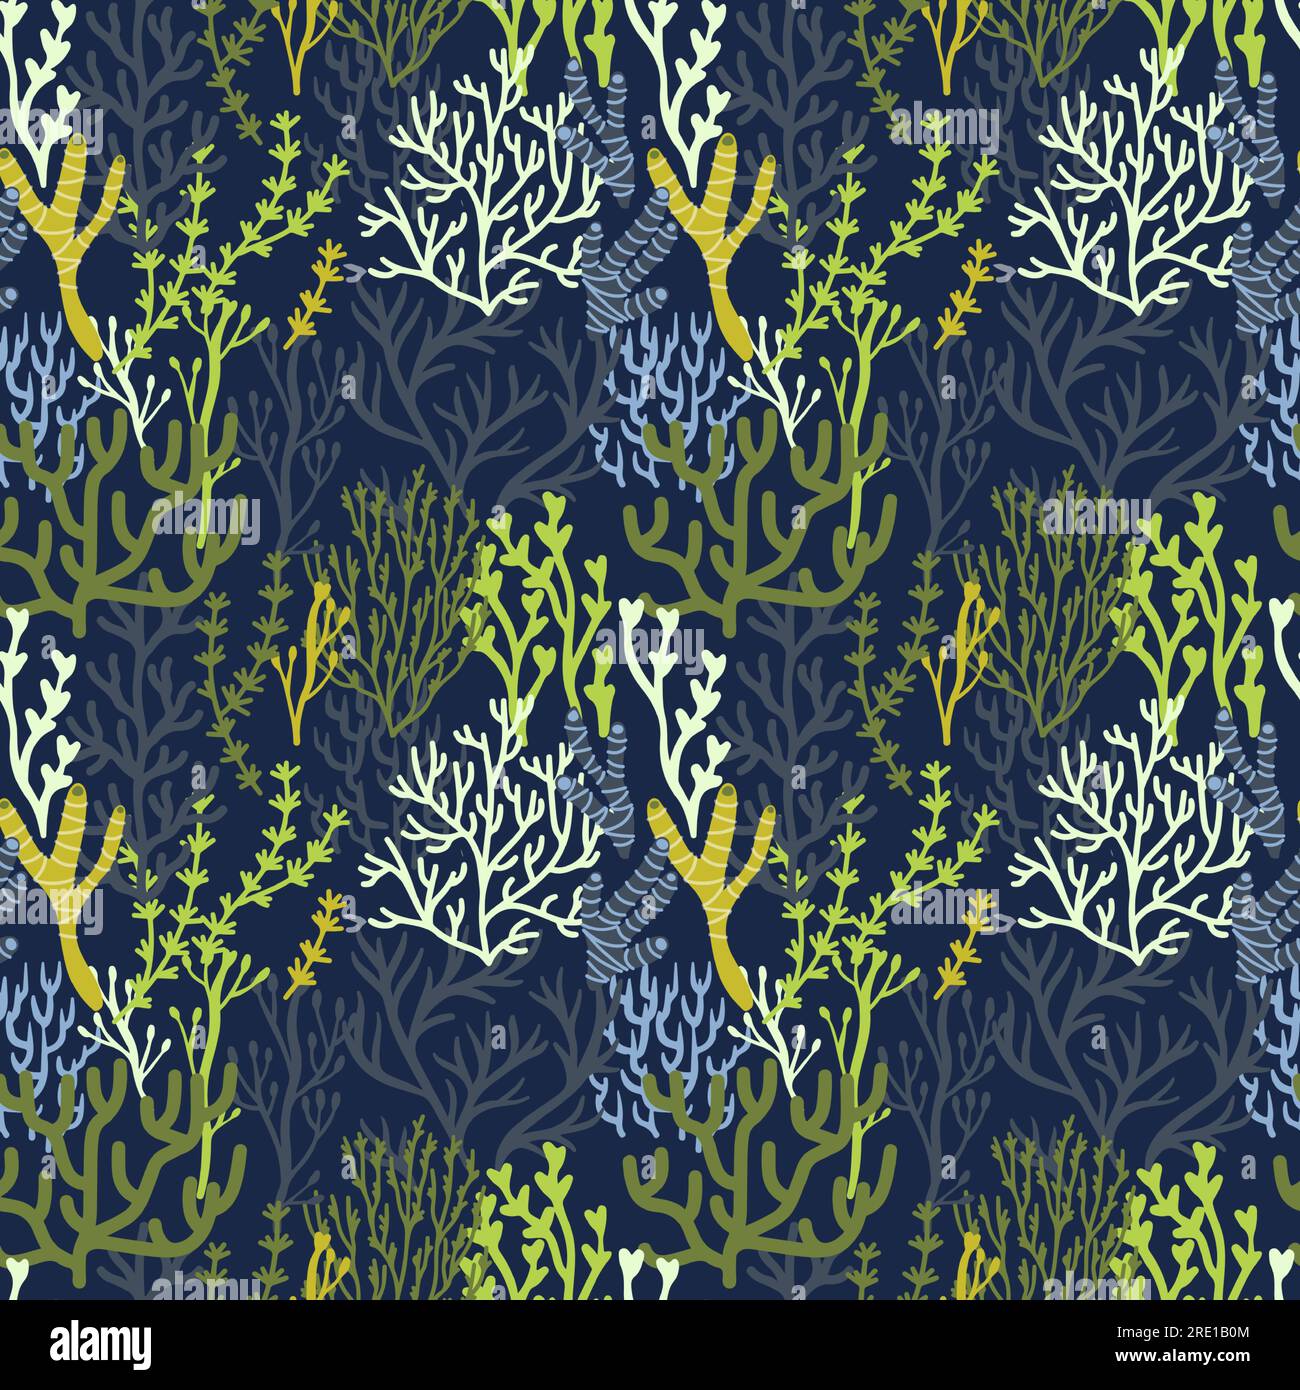 Seaweeds pattern. Seamless print of aquatic plants and nature, wallpaper background with cartoon blue algae, endless marine wrapping paper and textile Stock Vector